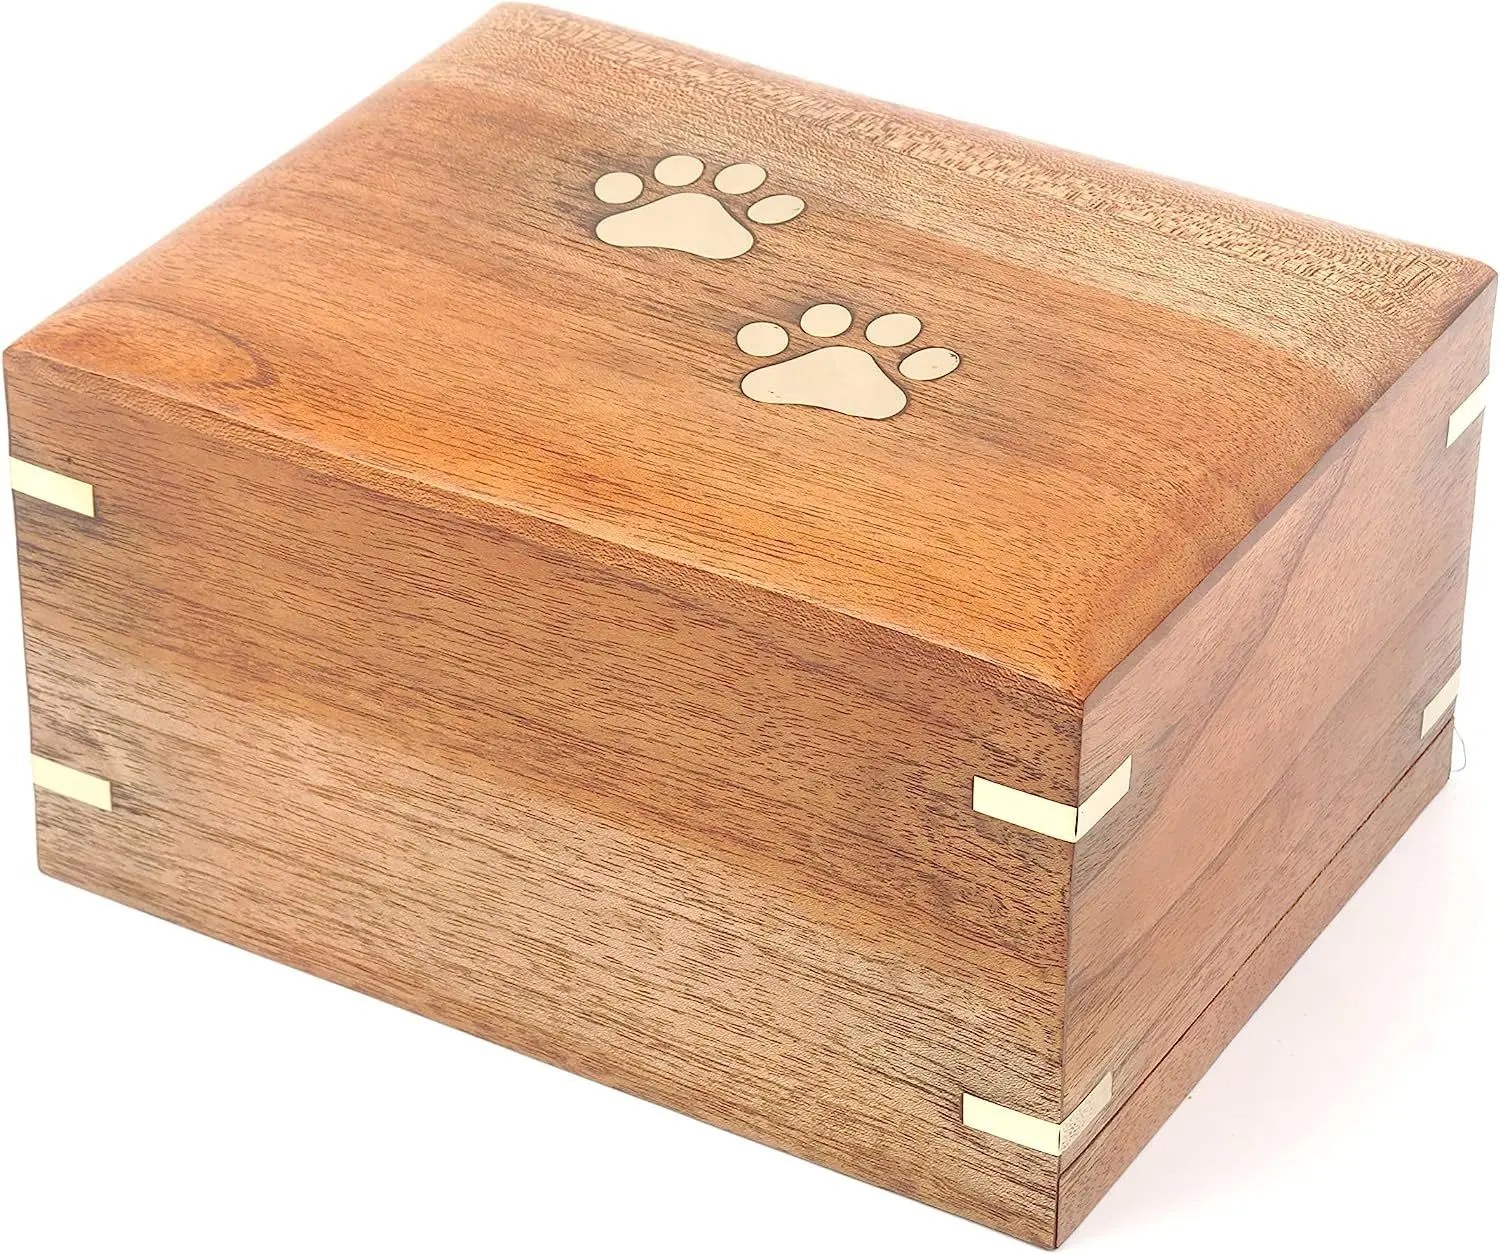 Paw Print Pet Cremation wooden Pet Urns Animal ashes holder box dog and cat Pet Cremation Urn Memorial Box for Ashes